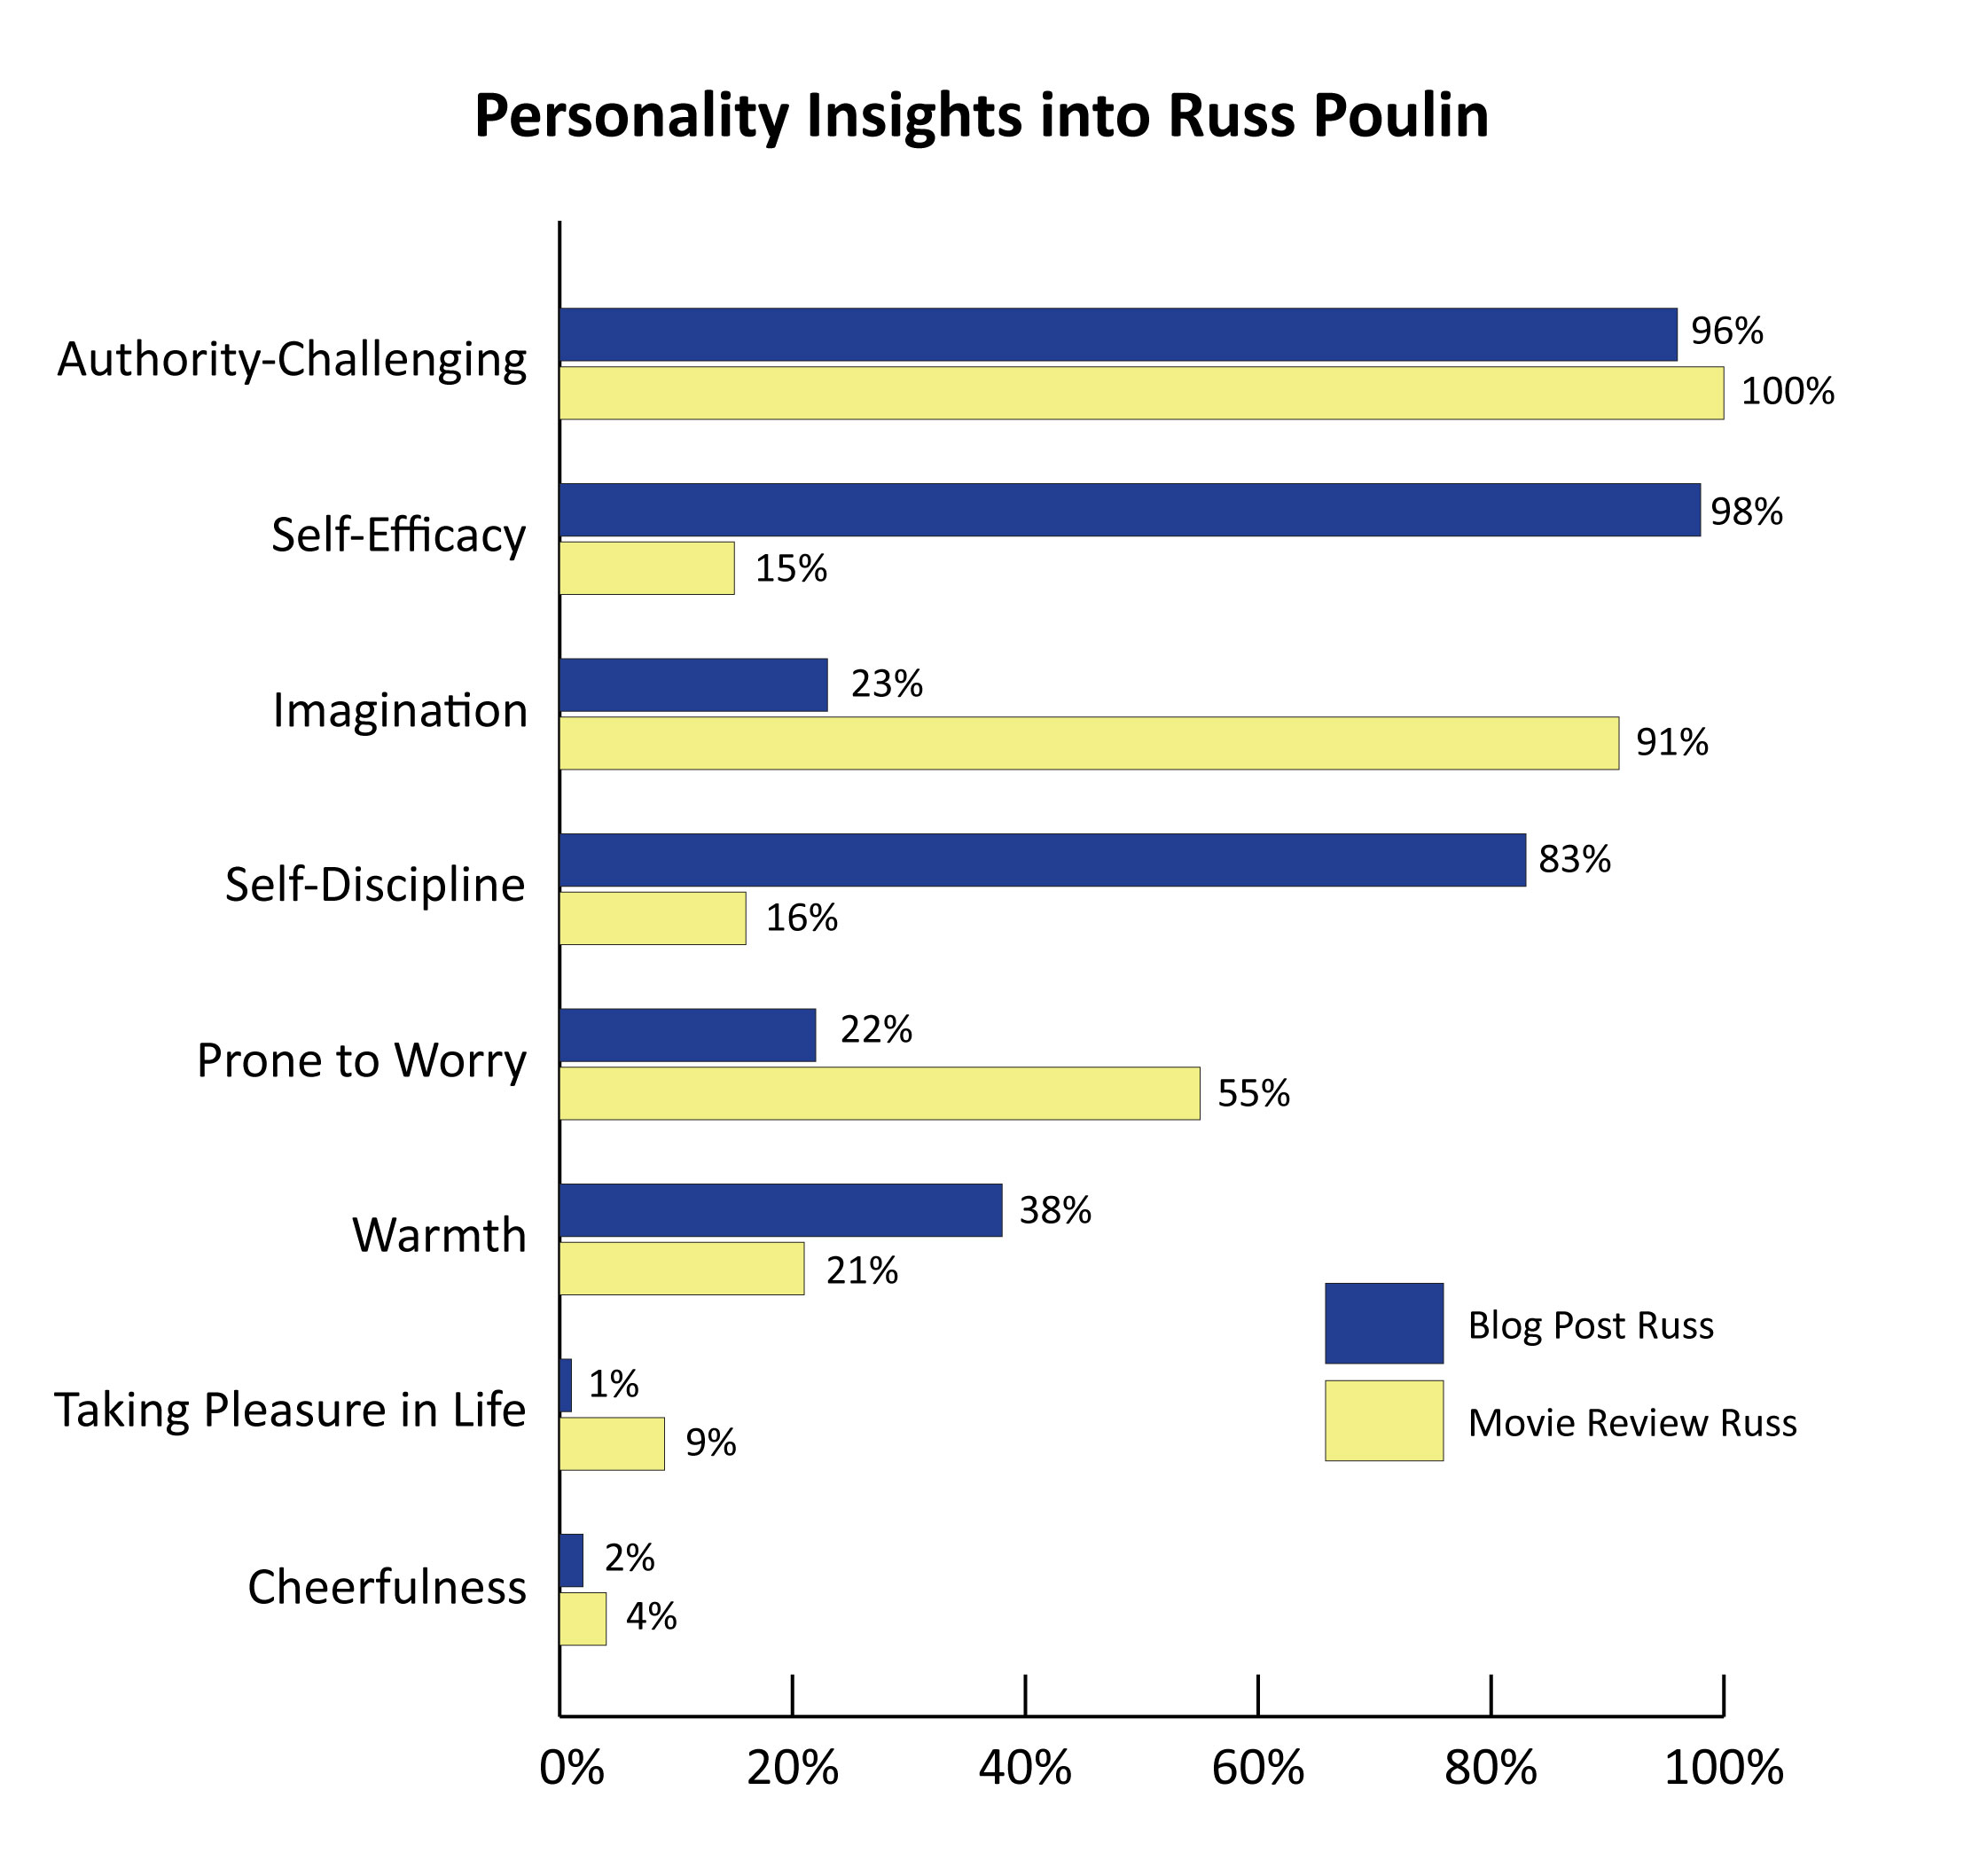 graph showing the personality traits of Russ (authority challenging, self efficacy, imagination, self discipline, prone to worry, warmth, taking pleasure in life, cheerfulness)